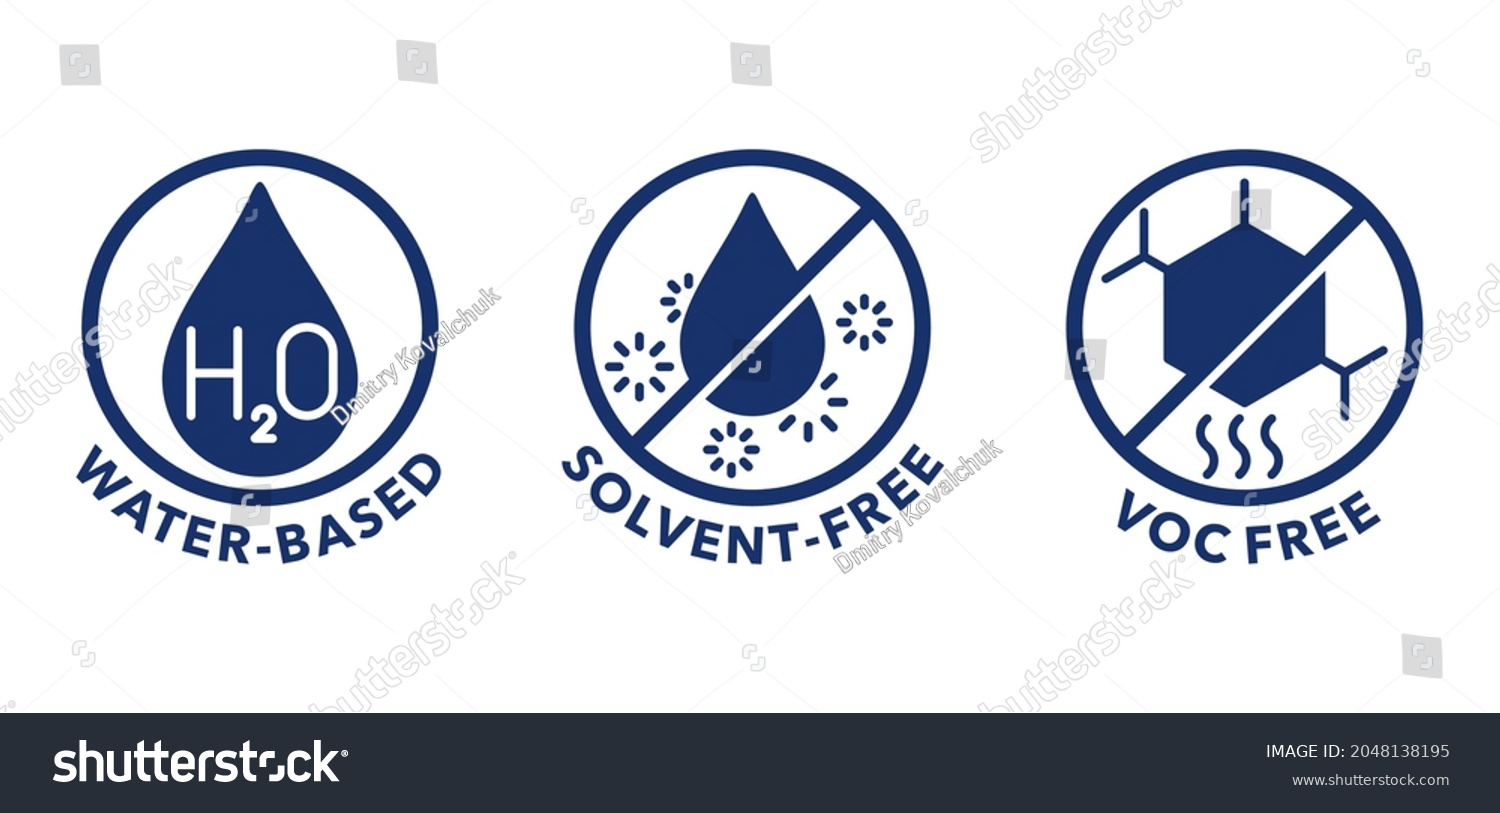 SVG of VOC free, Solvent free and Water based flat icons set for labeling of cleaning agent or other household chemicals svg